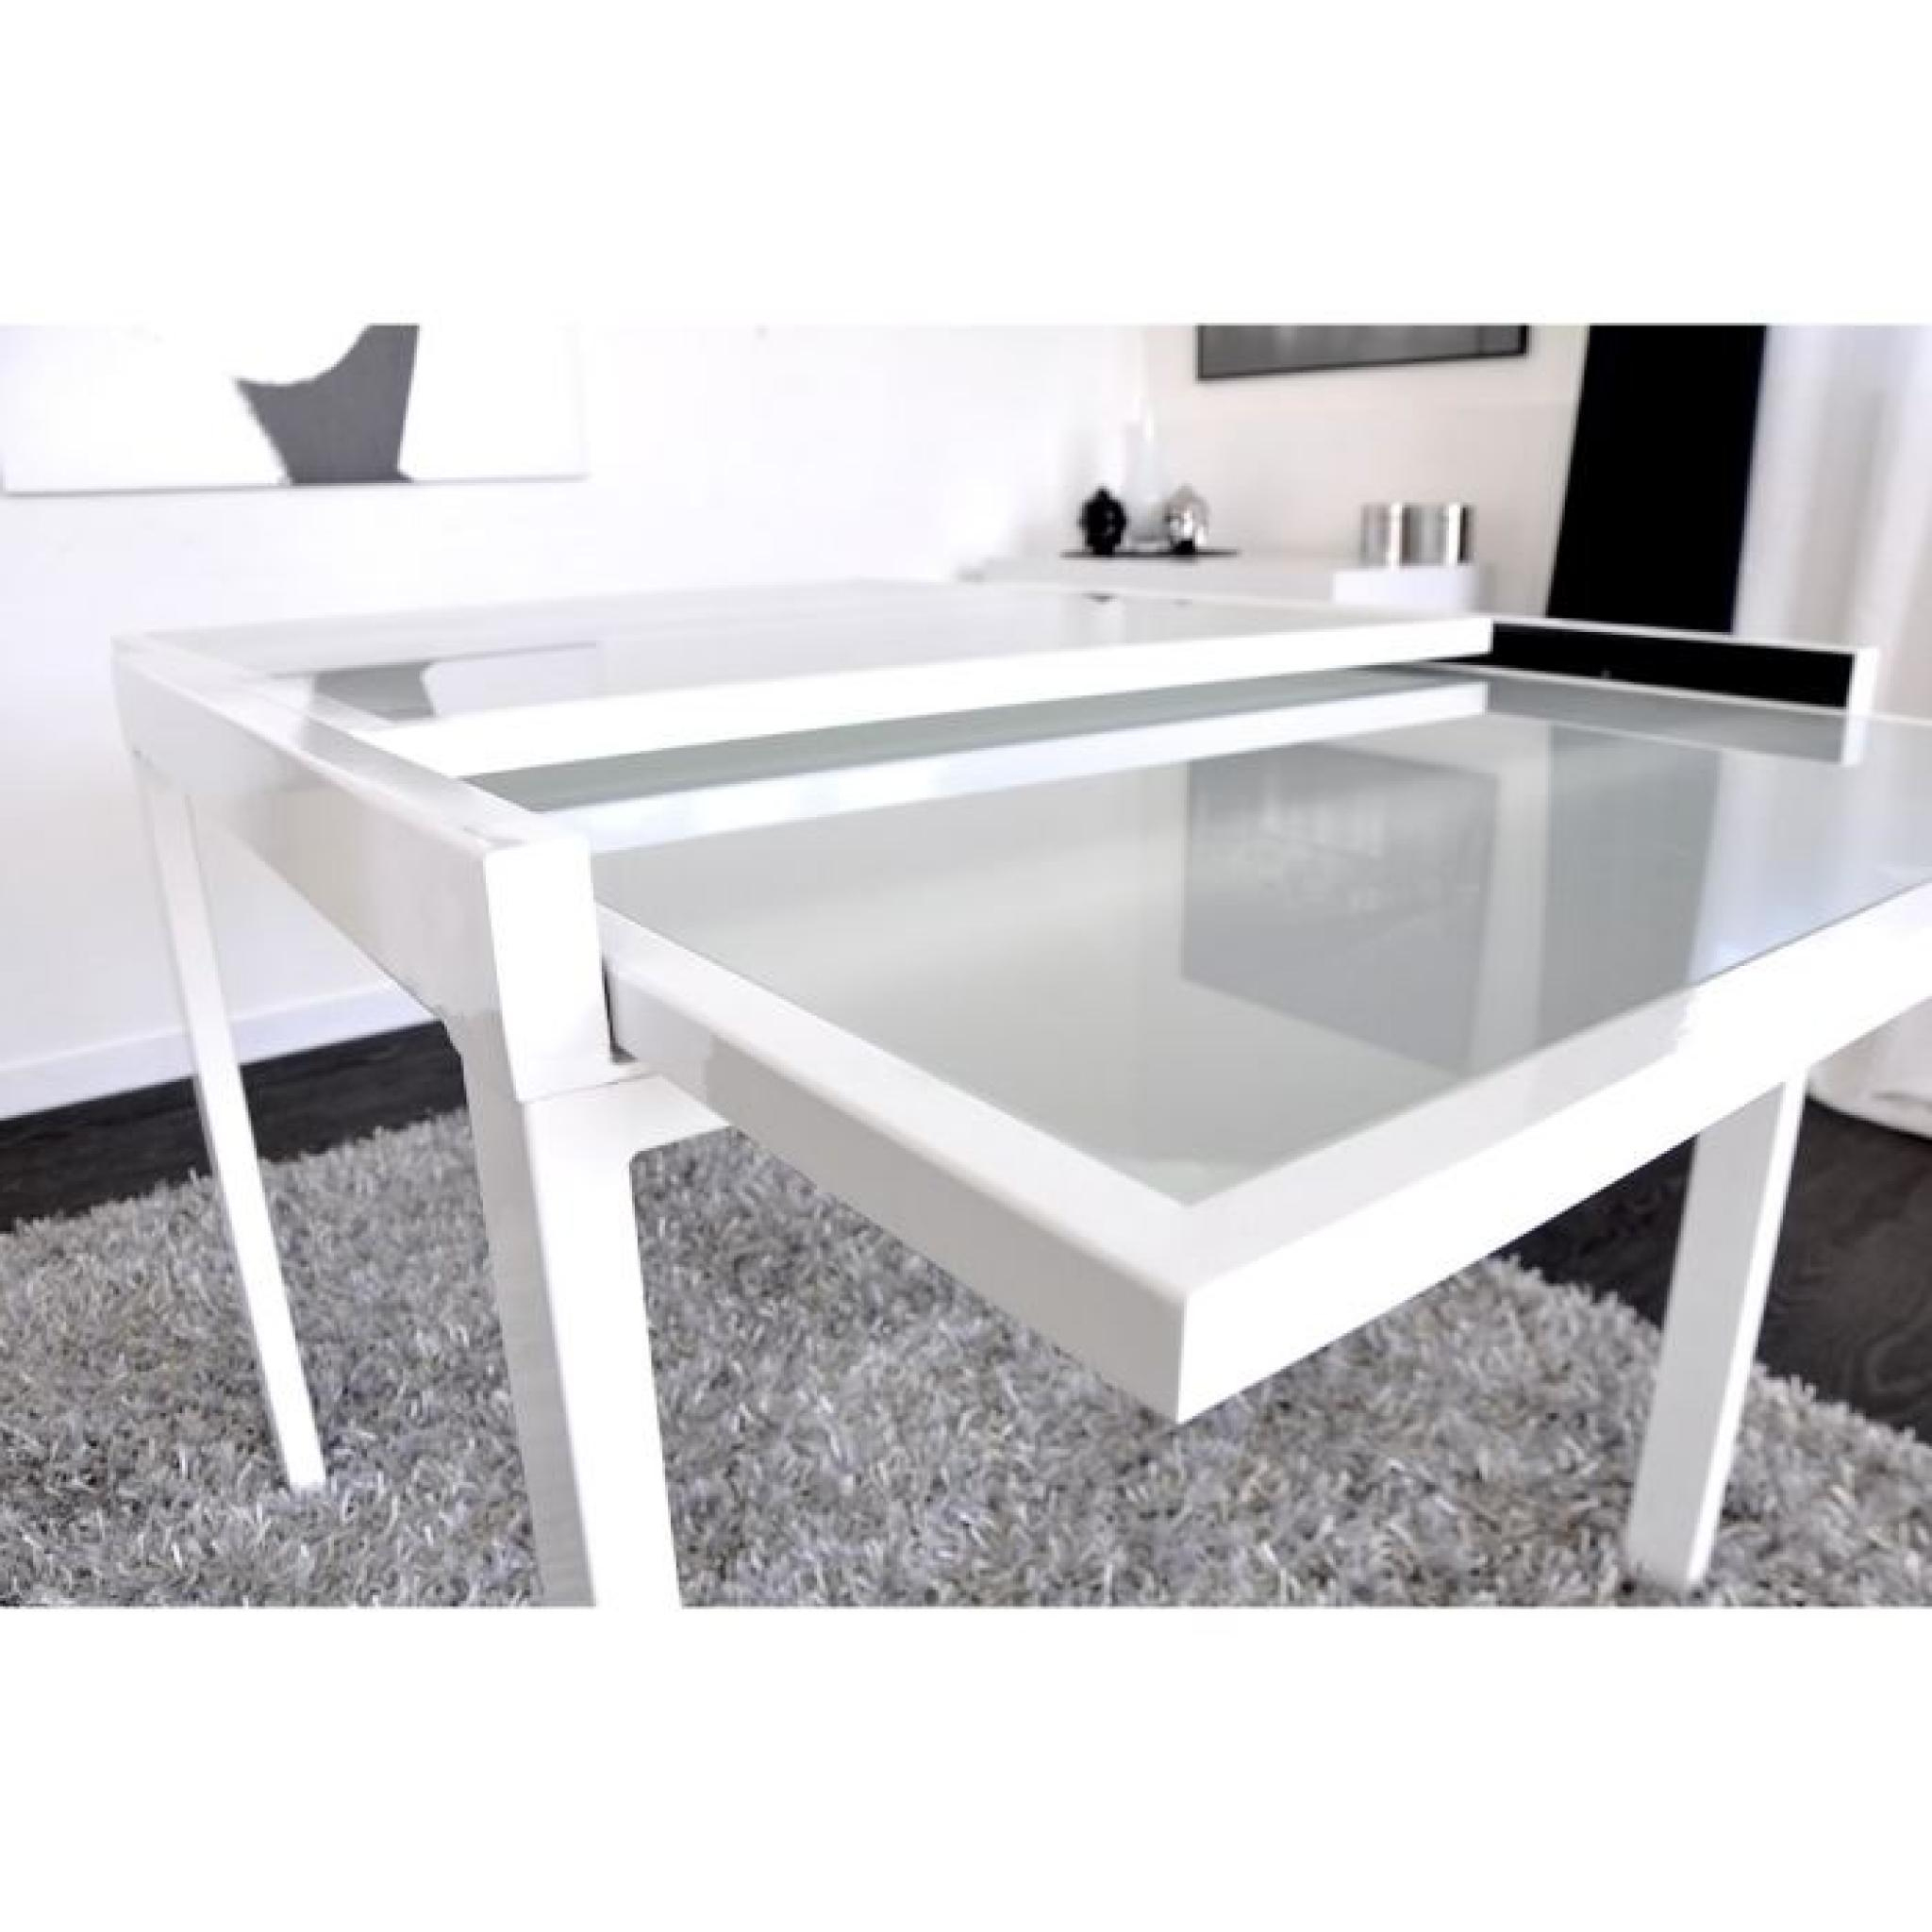 Extend Table Extensible Blanche 90/180Cm tout Table Salle A Manger Carree Blanche